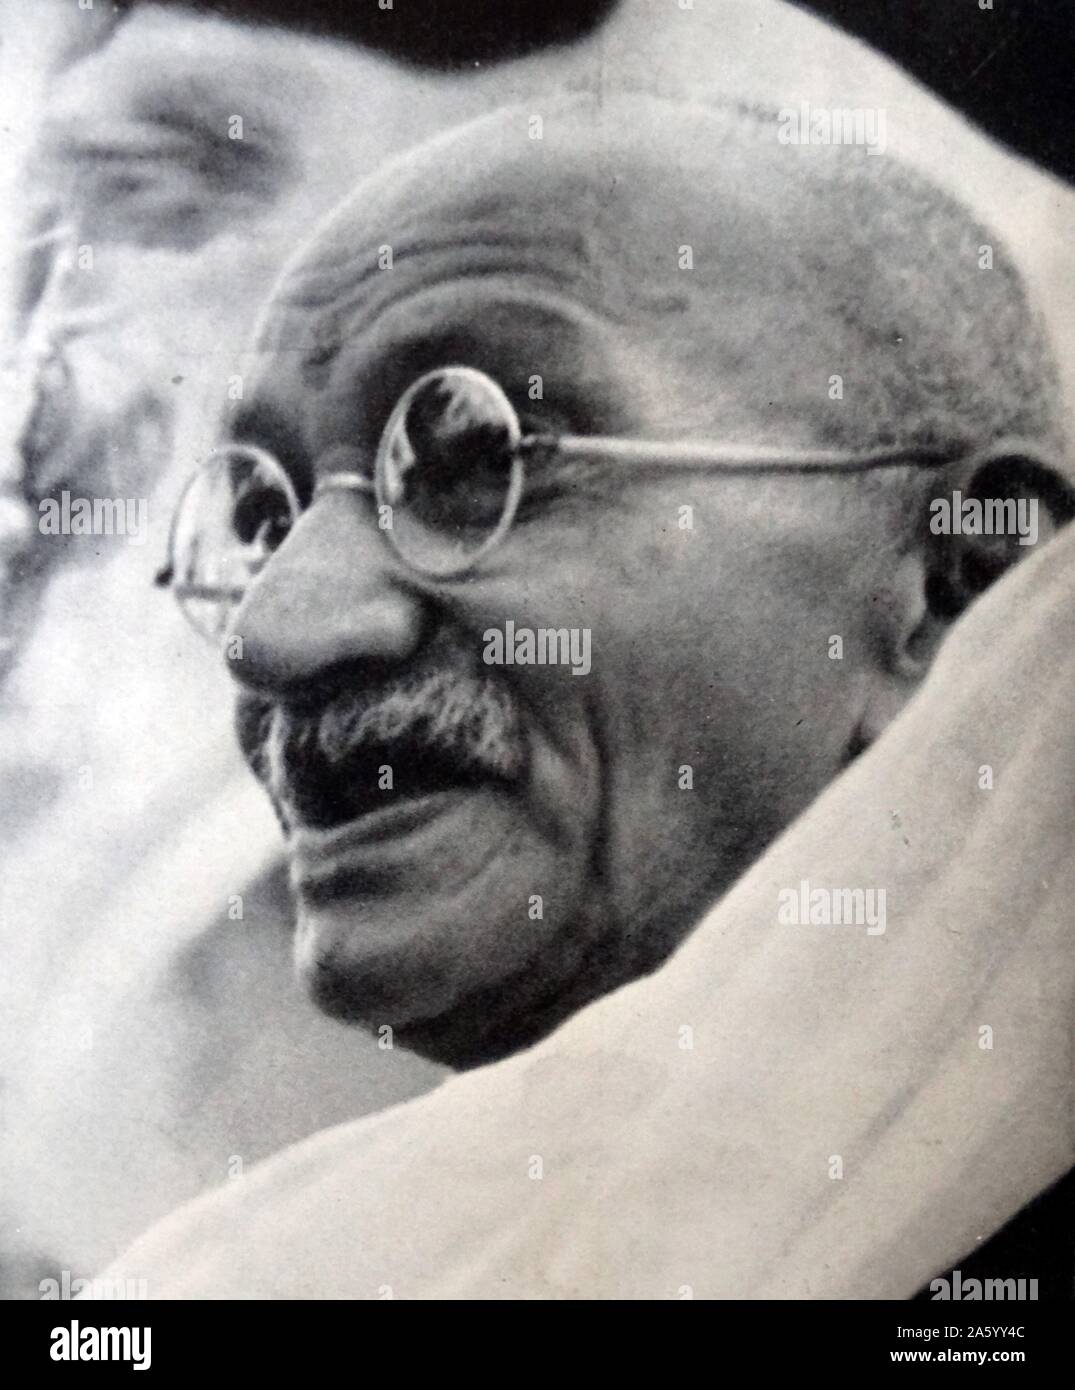 Mohandas Karamchand Gandhi (1869 – 1948), the preeminent leader of the Indian independence movement in British-ruled India. Employing nonviolent civil disobedience, Gandhi led India to independence and inspired movements for civil rights and freedom across the world. Stock Photo